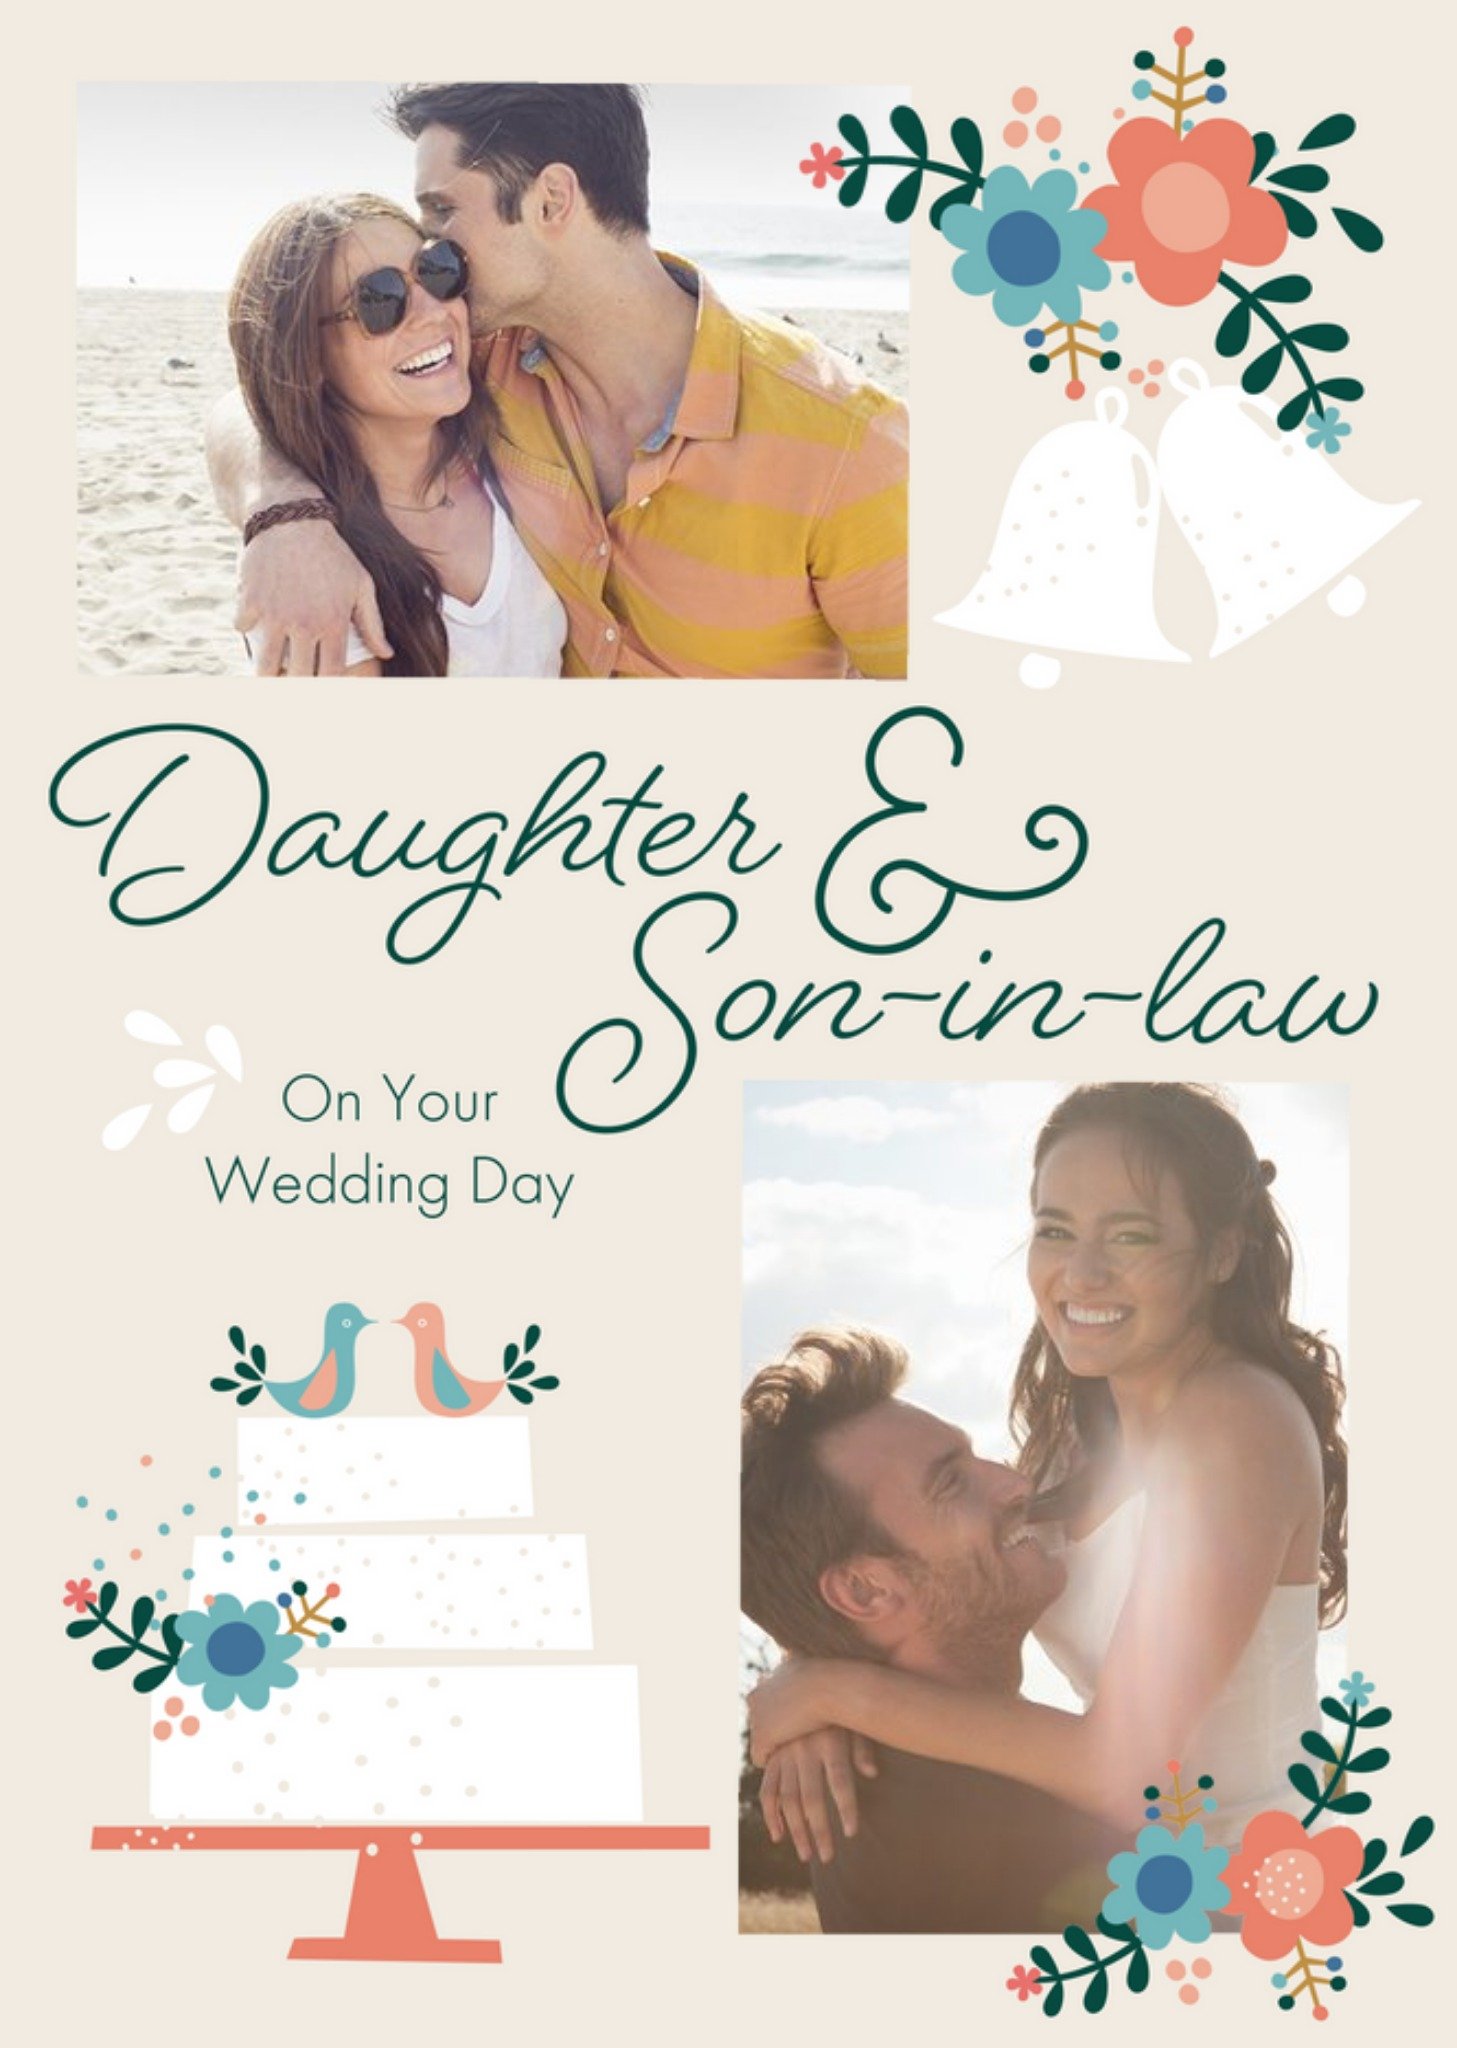 Moonpig Typographic Floral Design Daughter And Son In Law On Your Wedding Day Photo Upload Card Ecar